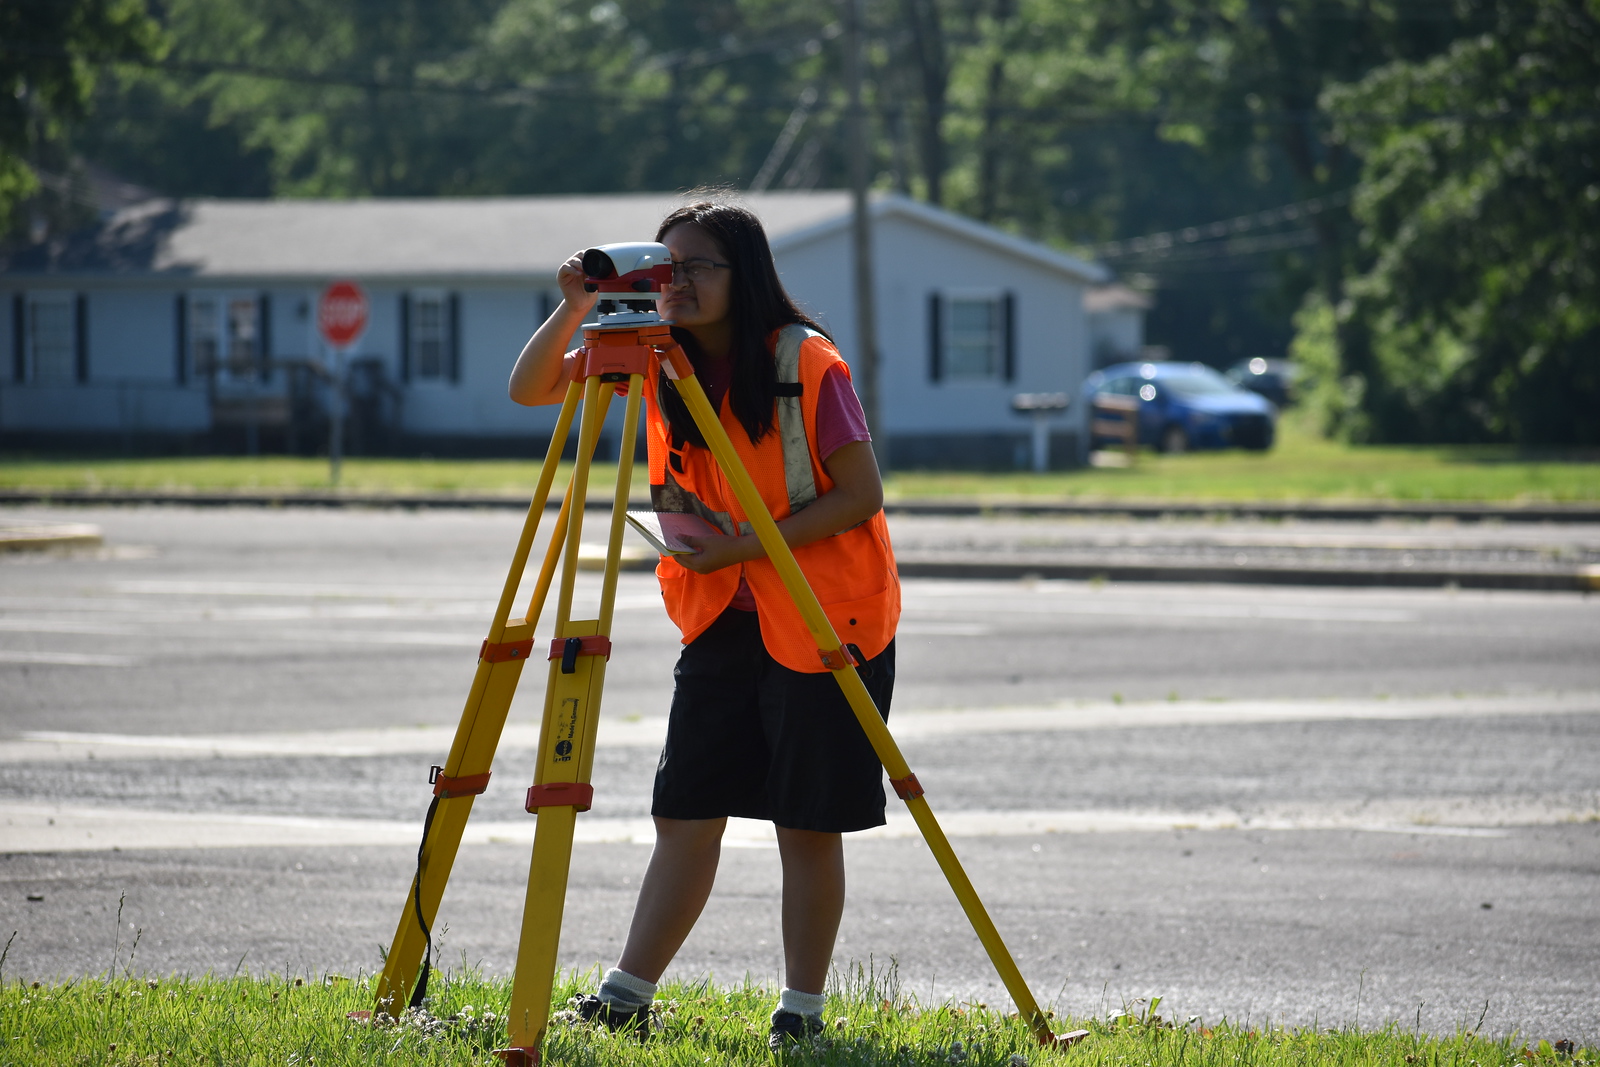 A student looking through the eyepiece of surveying equipment.